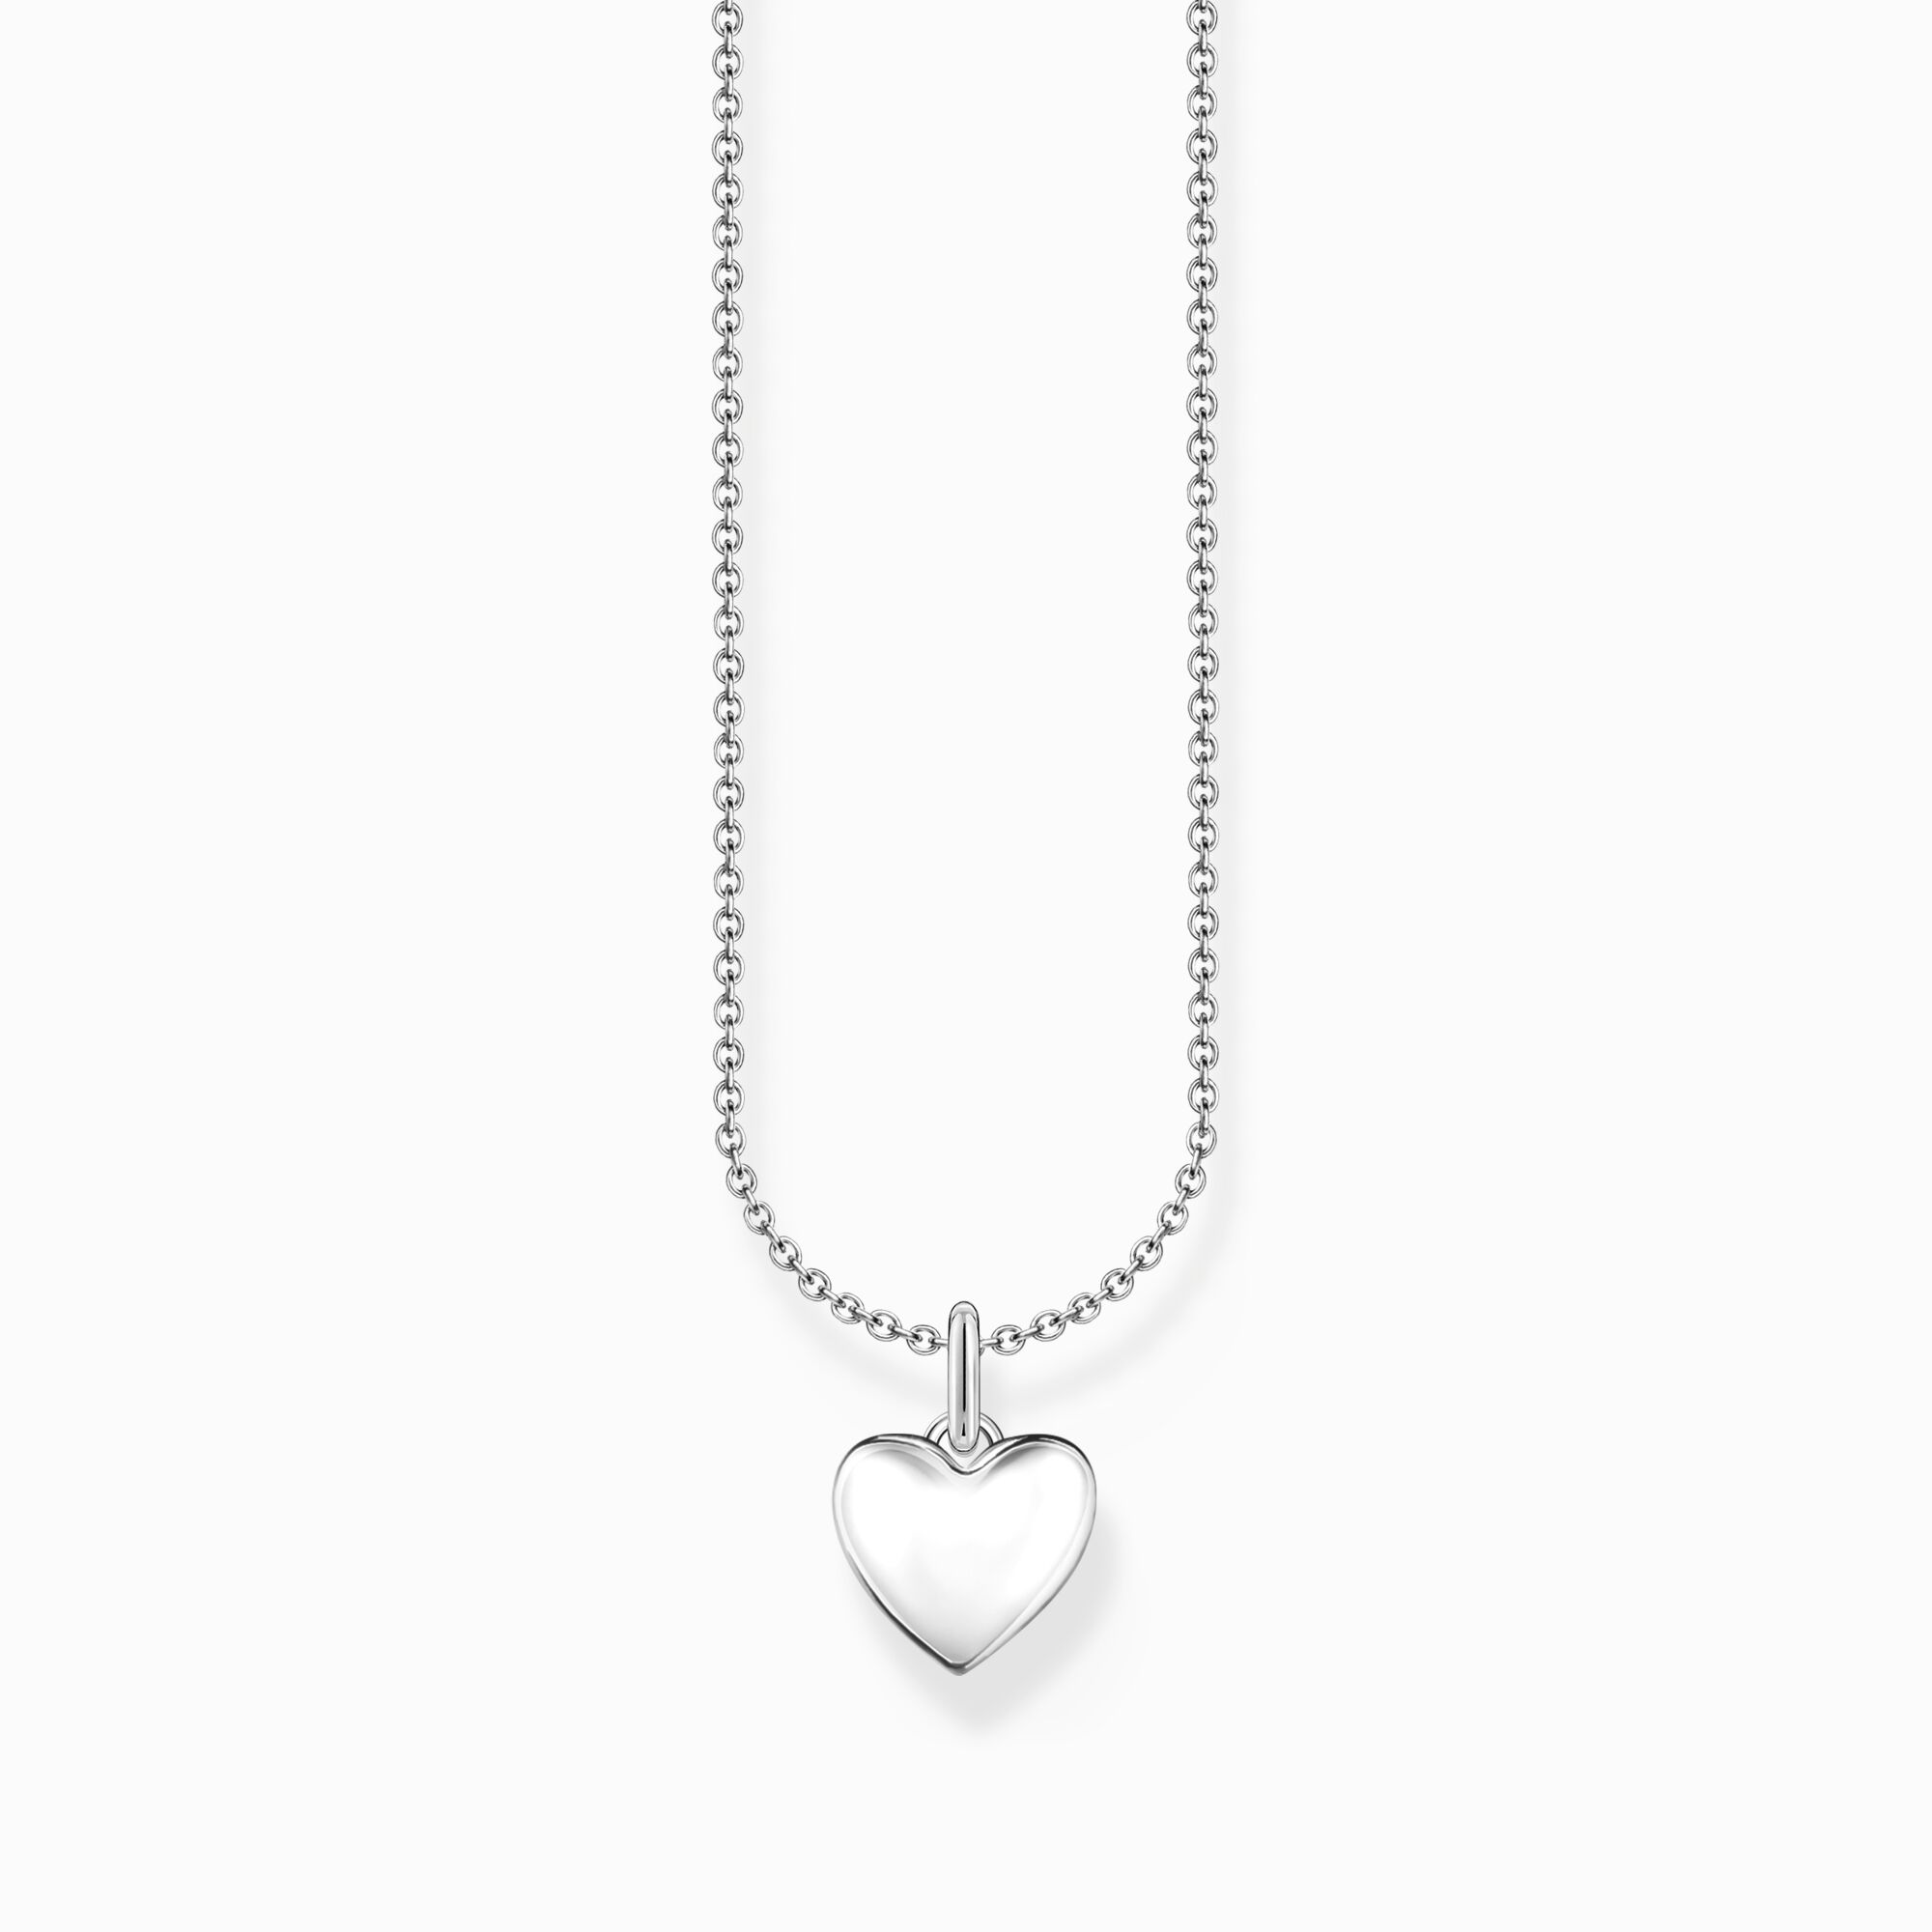 Silver necklace with heart pendant from the Charming Collection collection in the THOMAS SABO online store